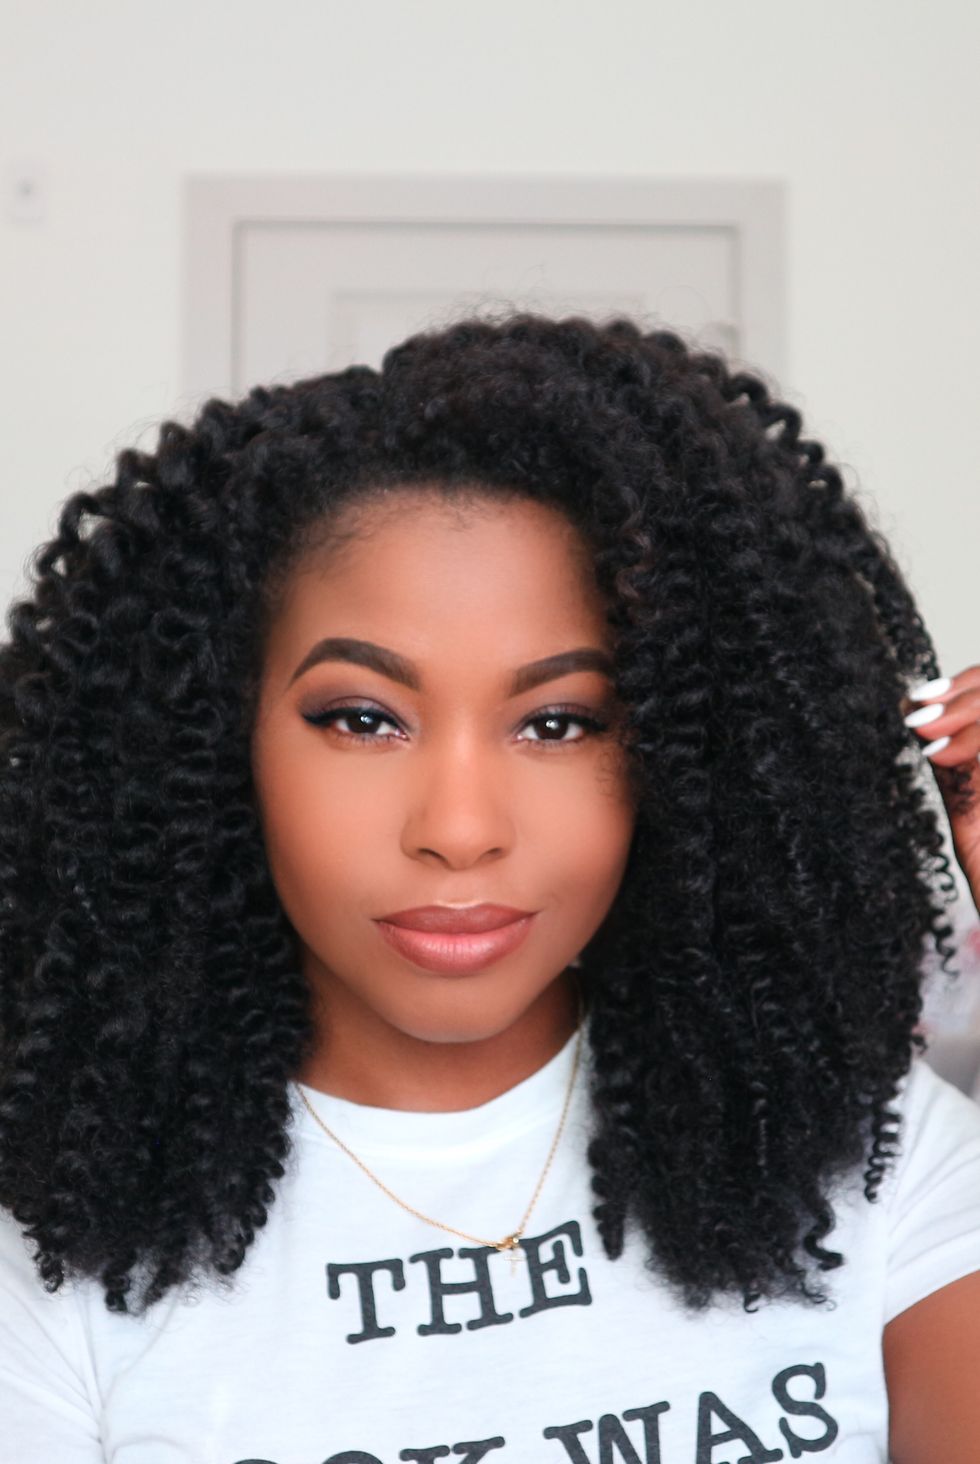 10 Crochet Curly Braid Hair Styles. Plus, Video on How to Install Crochet